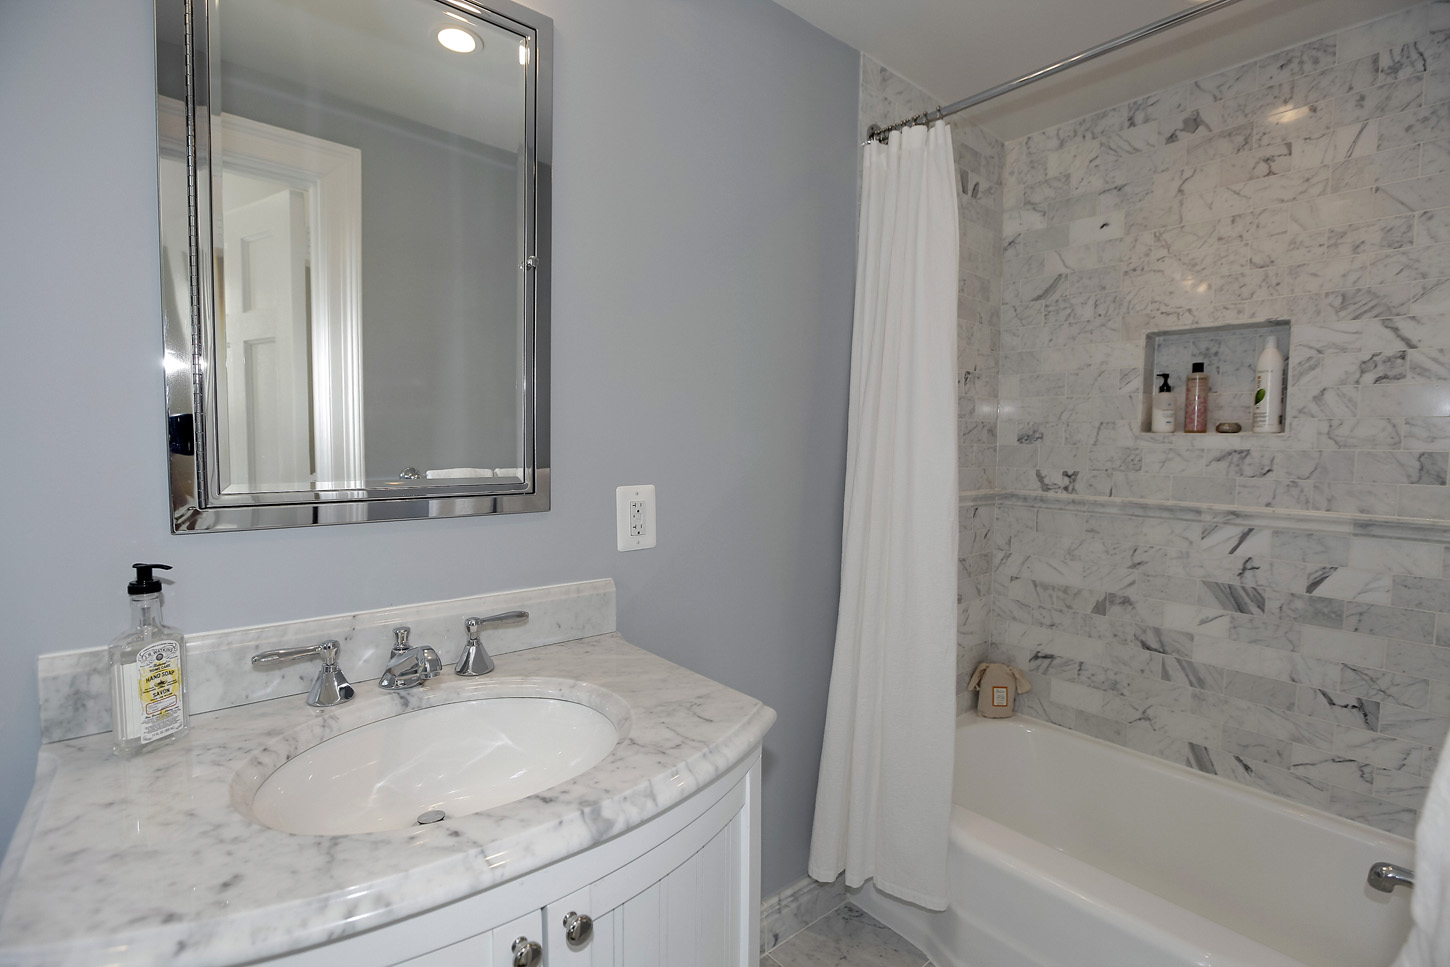 The en suite bathroom of the Obamas' new house, in the Kalorama area of Northwest D.C. (Courtesy McFadden Group)